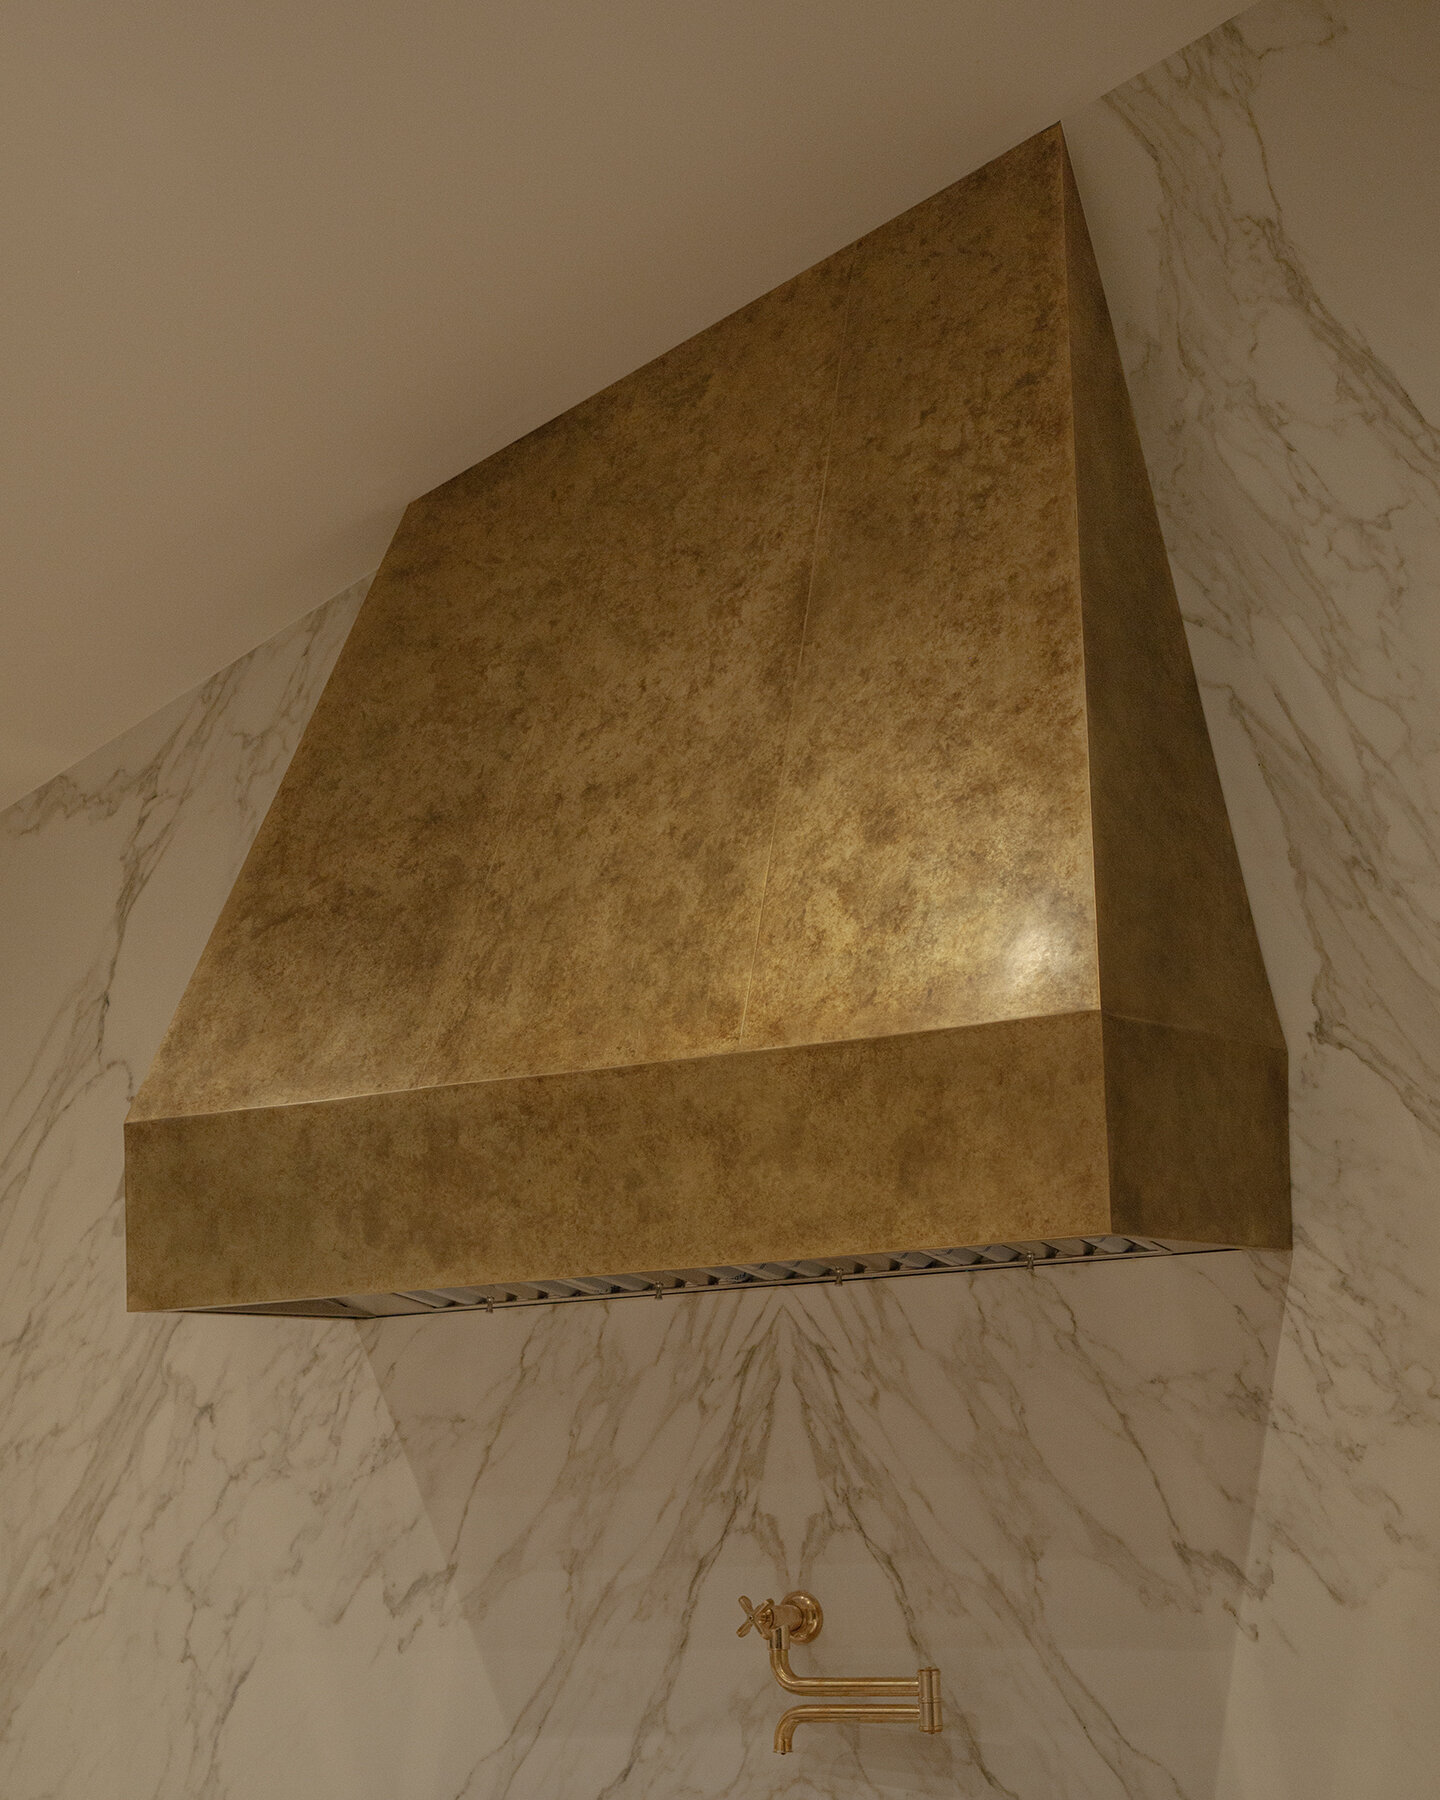 Hand patinated burnished brass finish installed flush against the porcelain backsplash. We don't often fabricate range hoods but this one was too sculptural to turn down.
For a private residence.
.
.
.
.
.
.
.
.
.
.
#gadartandfabricaiton #brass #bras